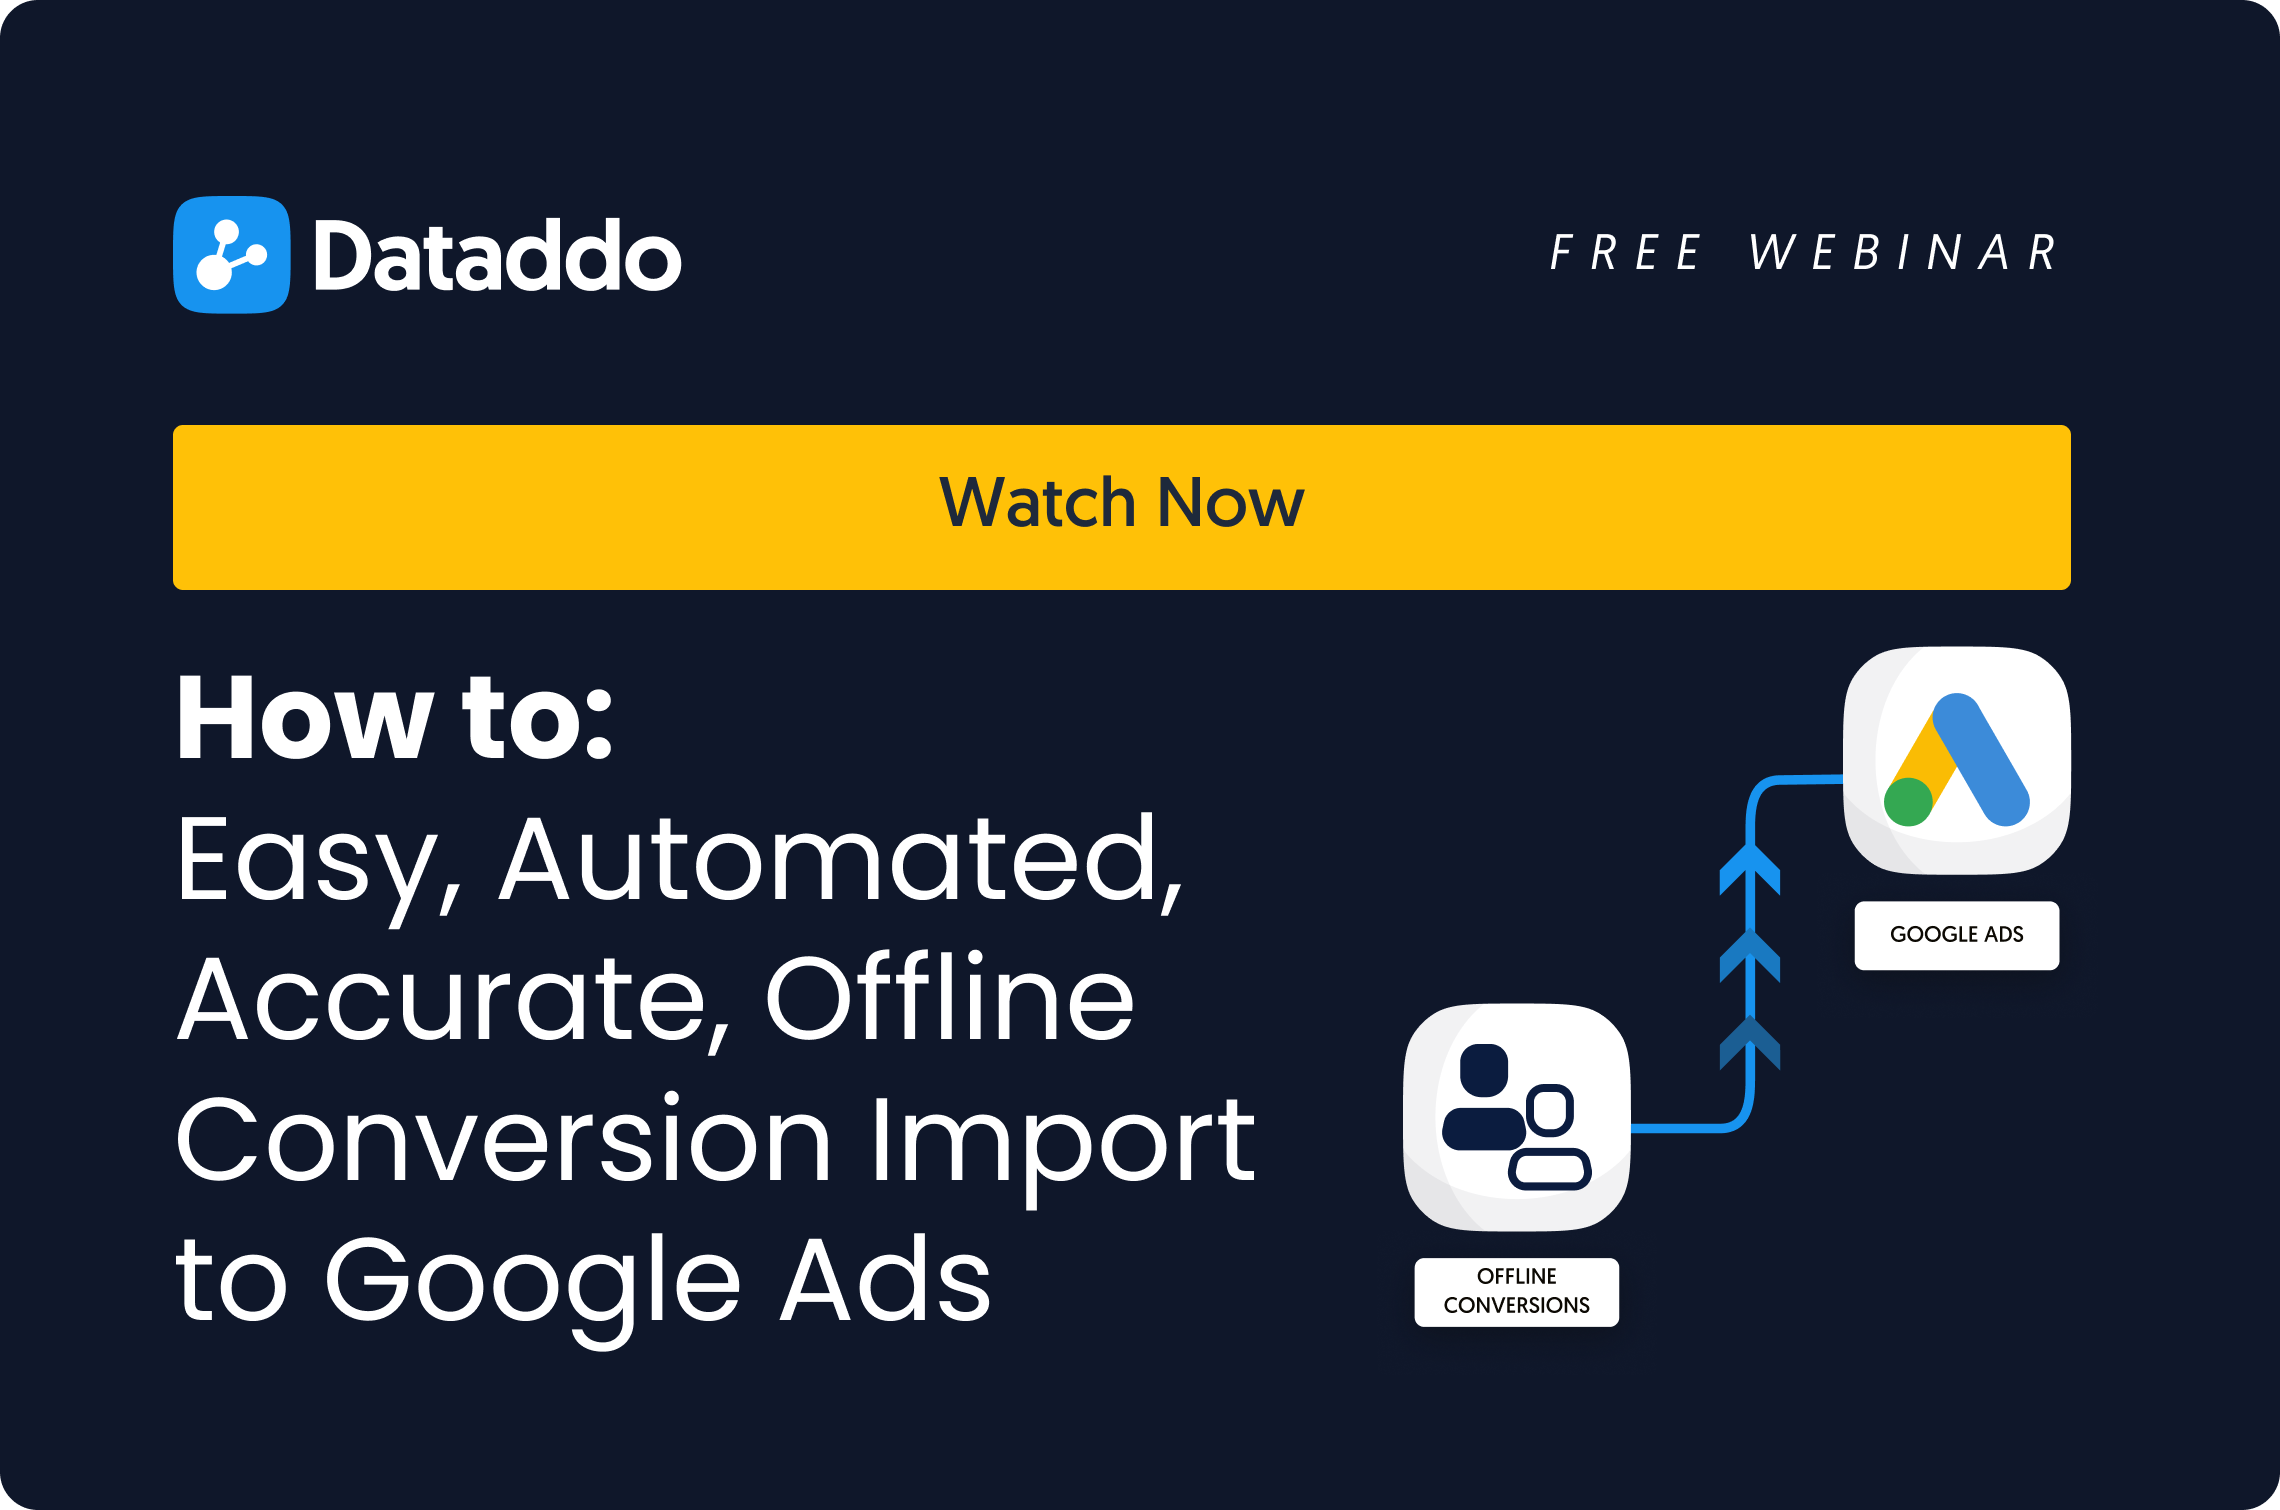 [WEBINAR] How to Setup Automated, Accurate Offline Conversion Import to Google Ads